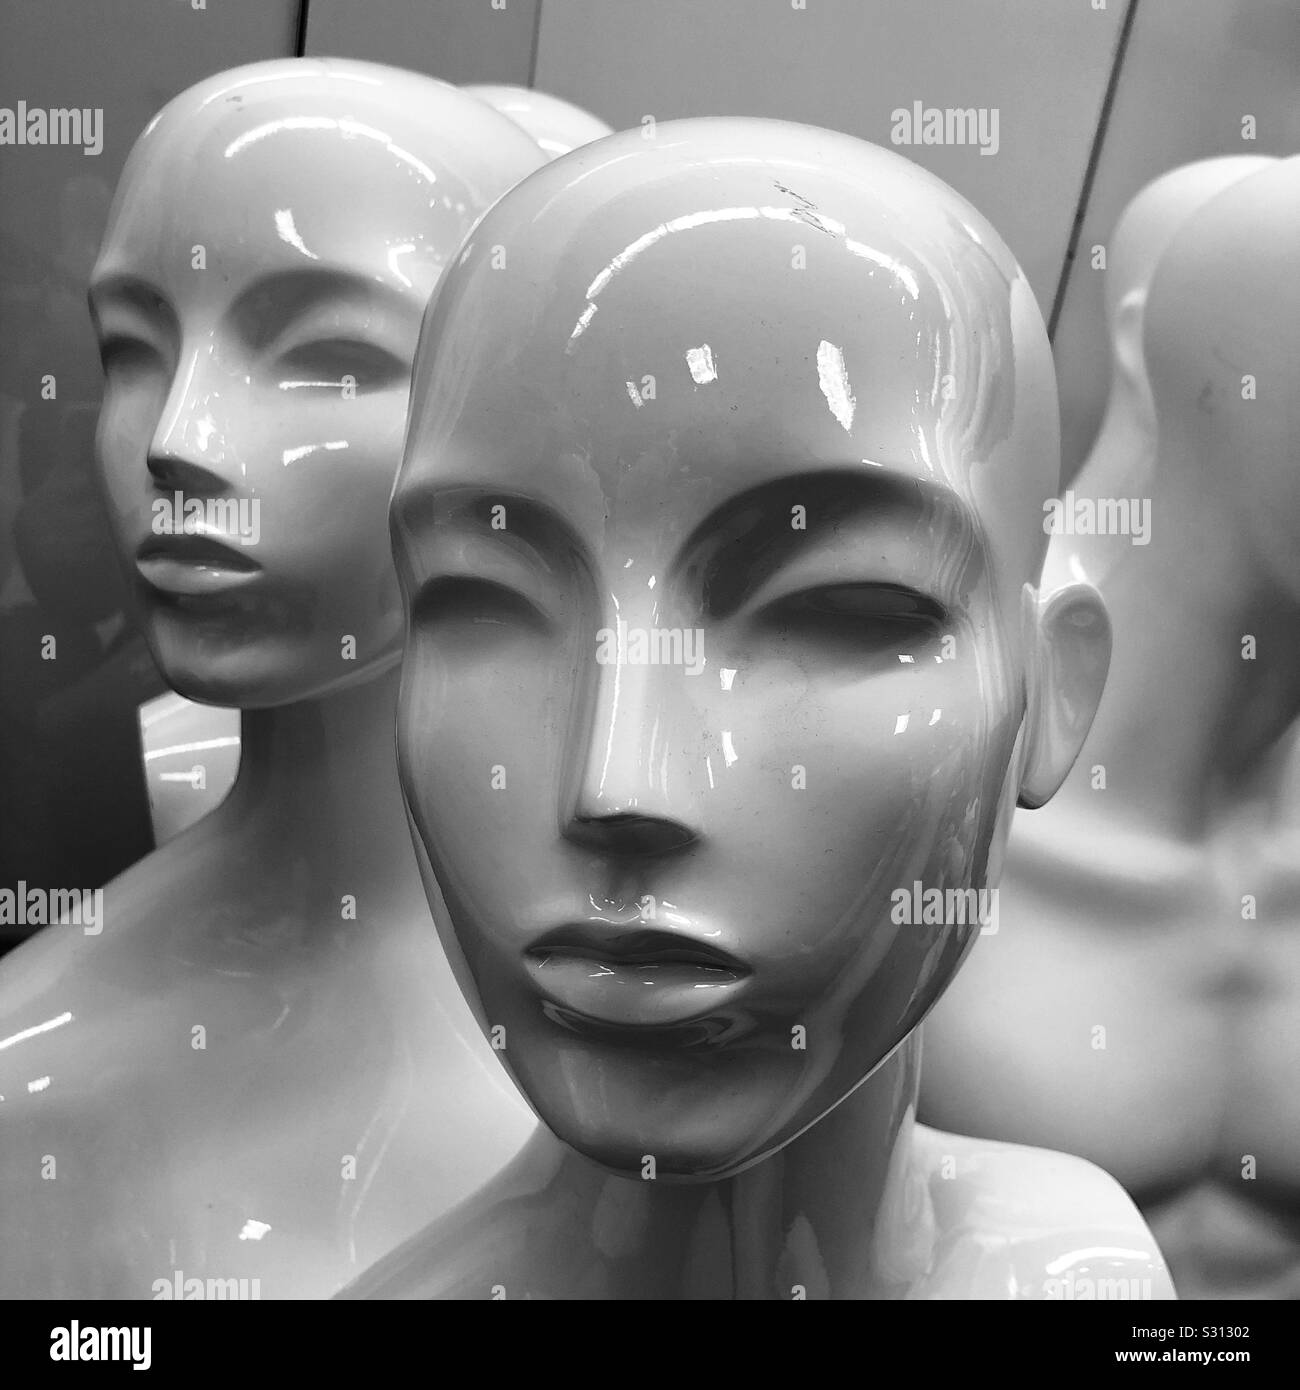 A black and white closeup of bald female mannequin heads Stock Photo